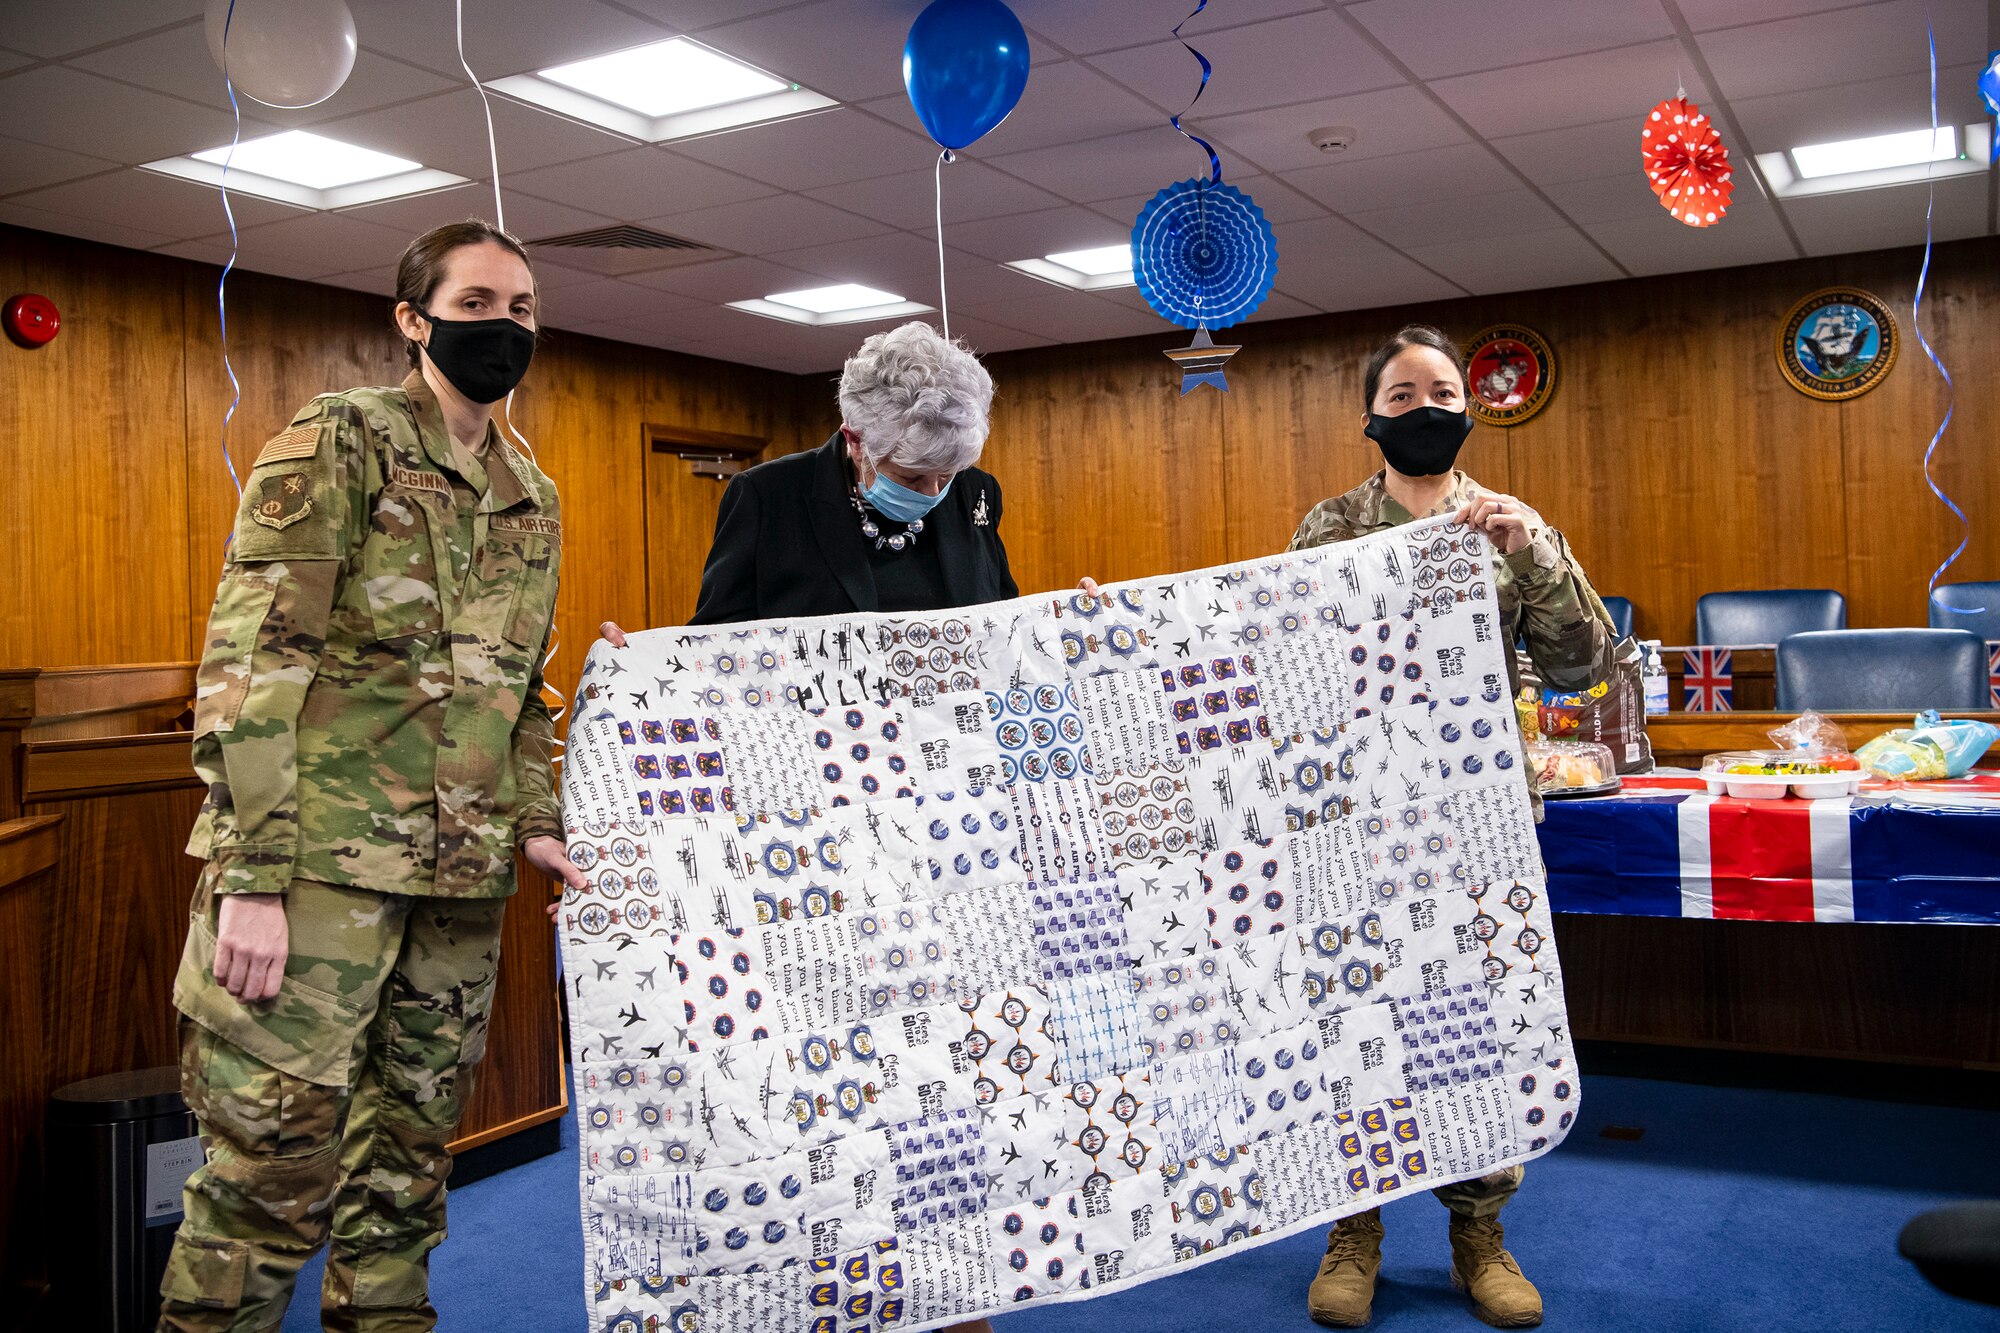 Maj. Danelle McGinnis, left, 501st CSW deputy staff judge advocate, and Master Sgt. Miriam Pantoja, right Judge Advocate Office, NCOIC of general law, present a quilt to Valerie Lucas,  501st Combat Support Wing British liaison officer, during a celebration at RAF Alconbury, England, April 23, 2021. The 501 CSW/JA office celebrated Mrs. Lucas for her 60 years of service as the British liaison officer at RAF Alconbury. (U.S. Air Force photo by Senior Airman Eugene Oliver)